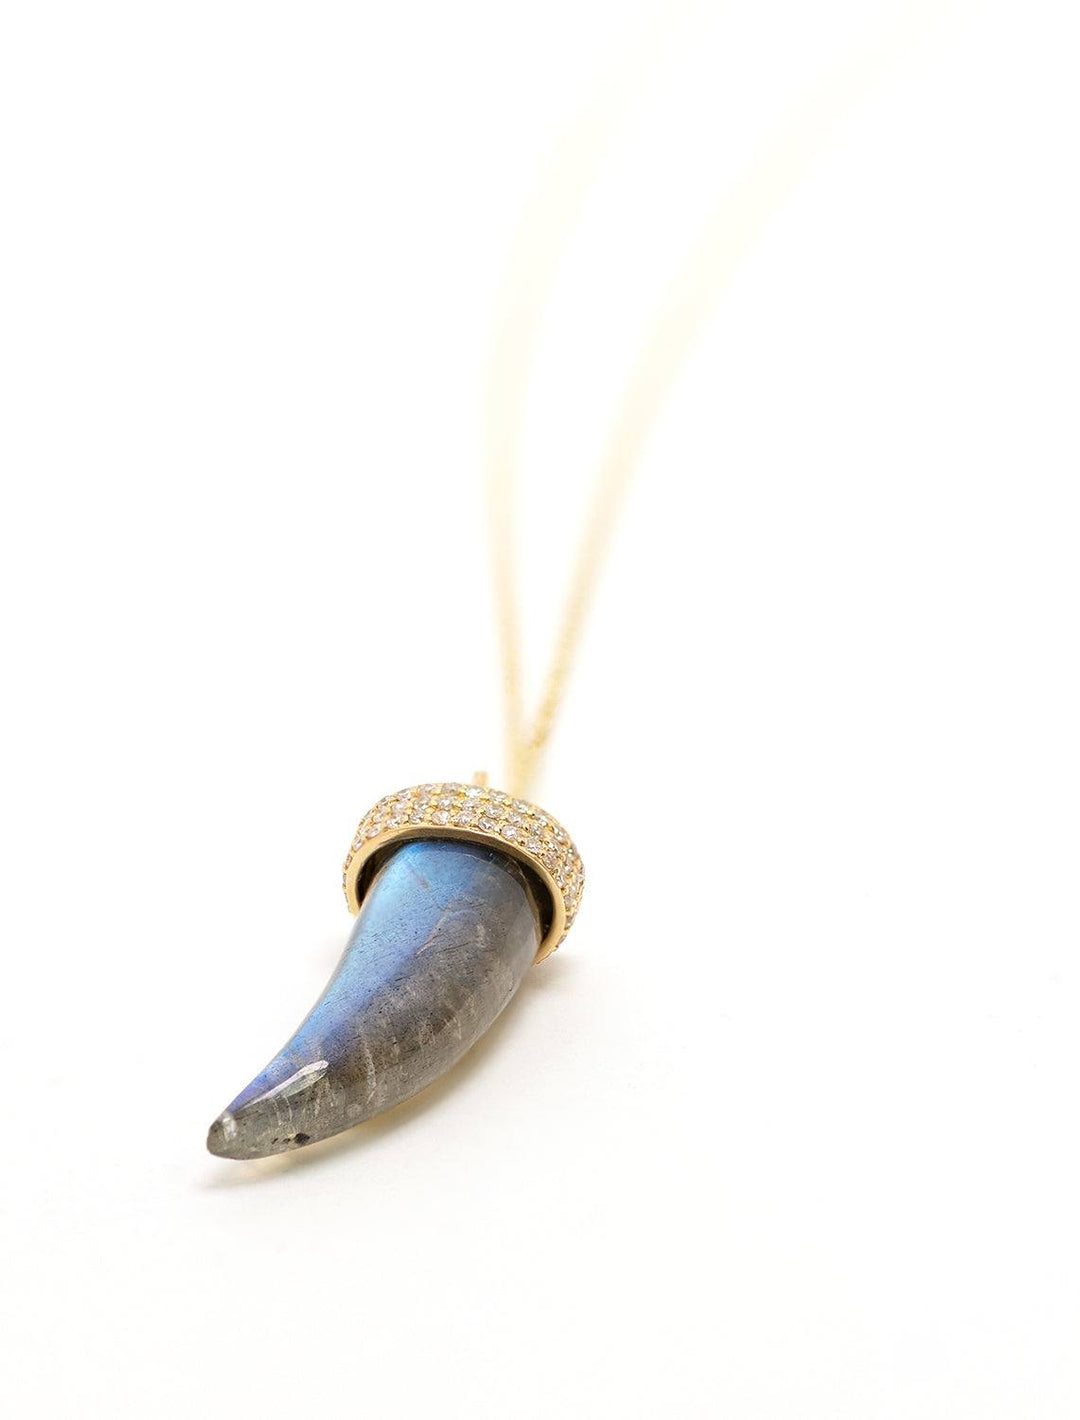 Close-up view of Sydney Evan's labradorite horn with diamond accents.